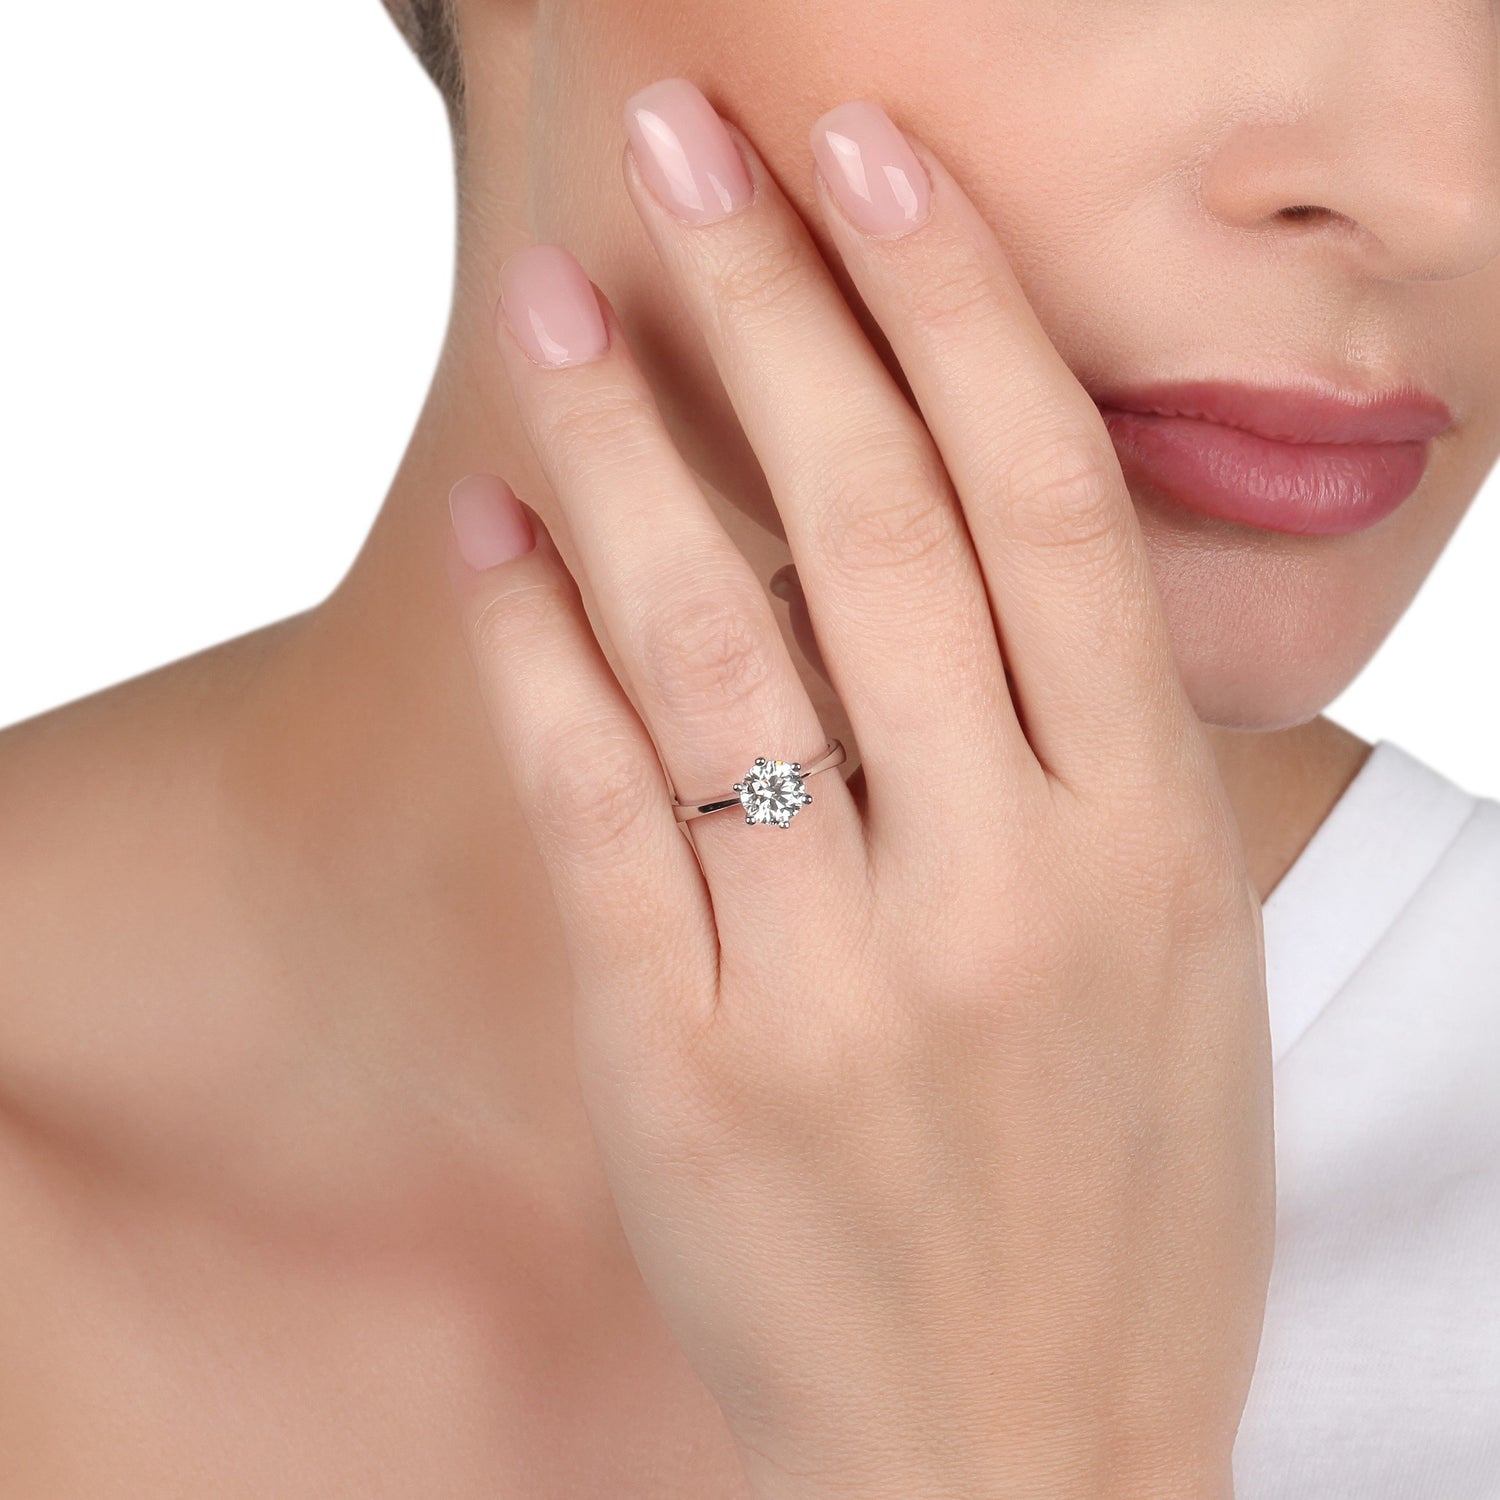 Certified Solitaire Diamond Ring | solitaire engagement ring | diamond rings for women